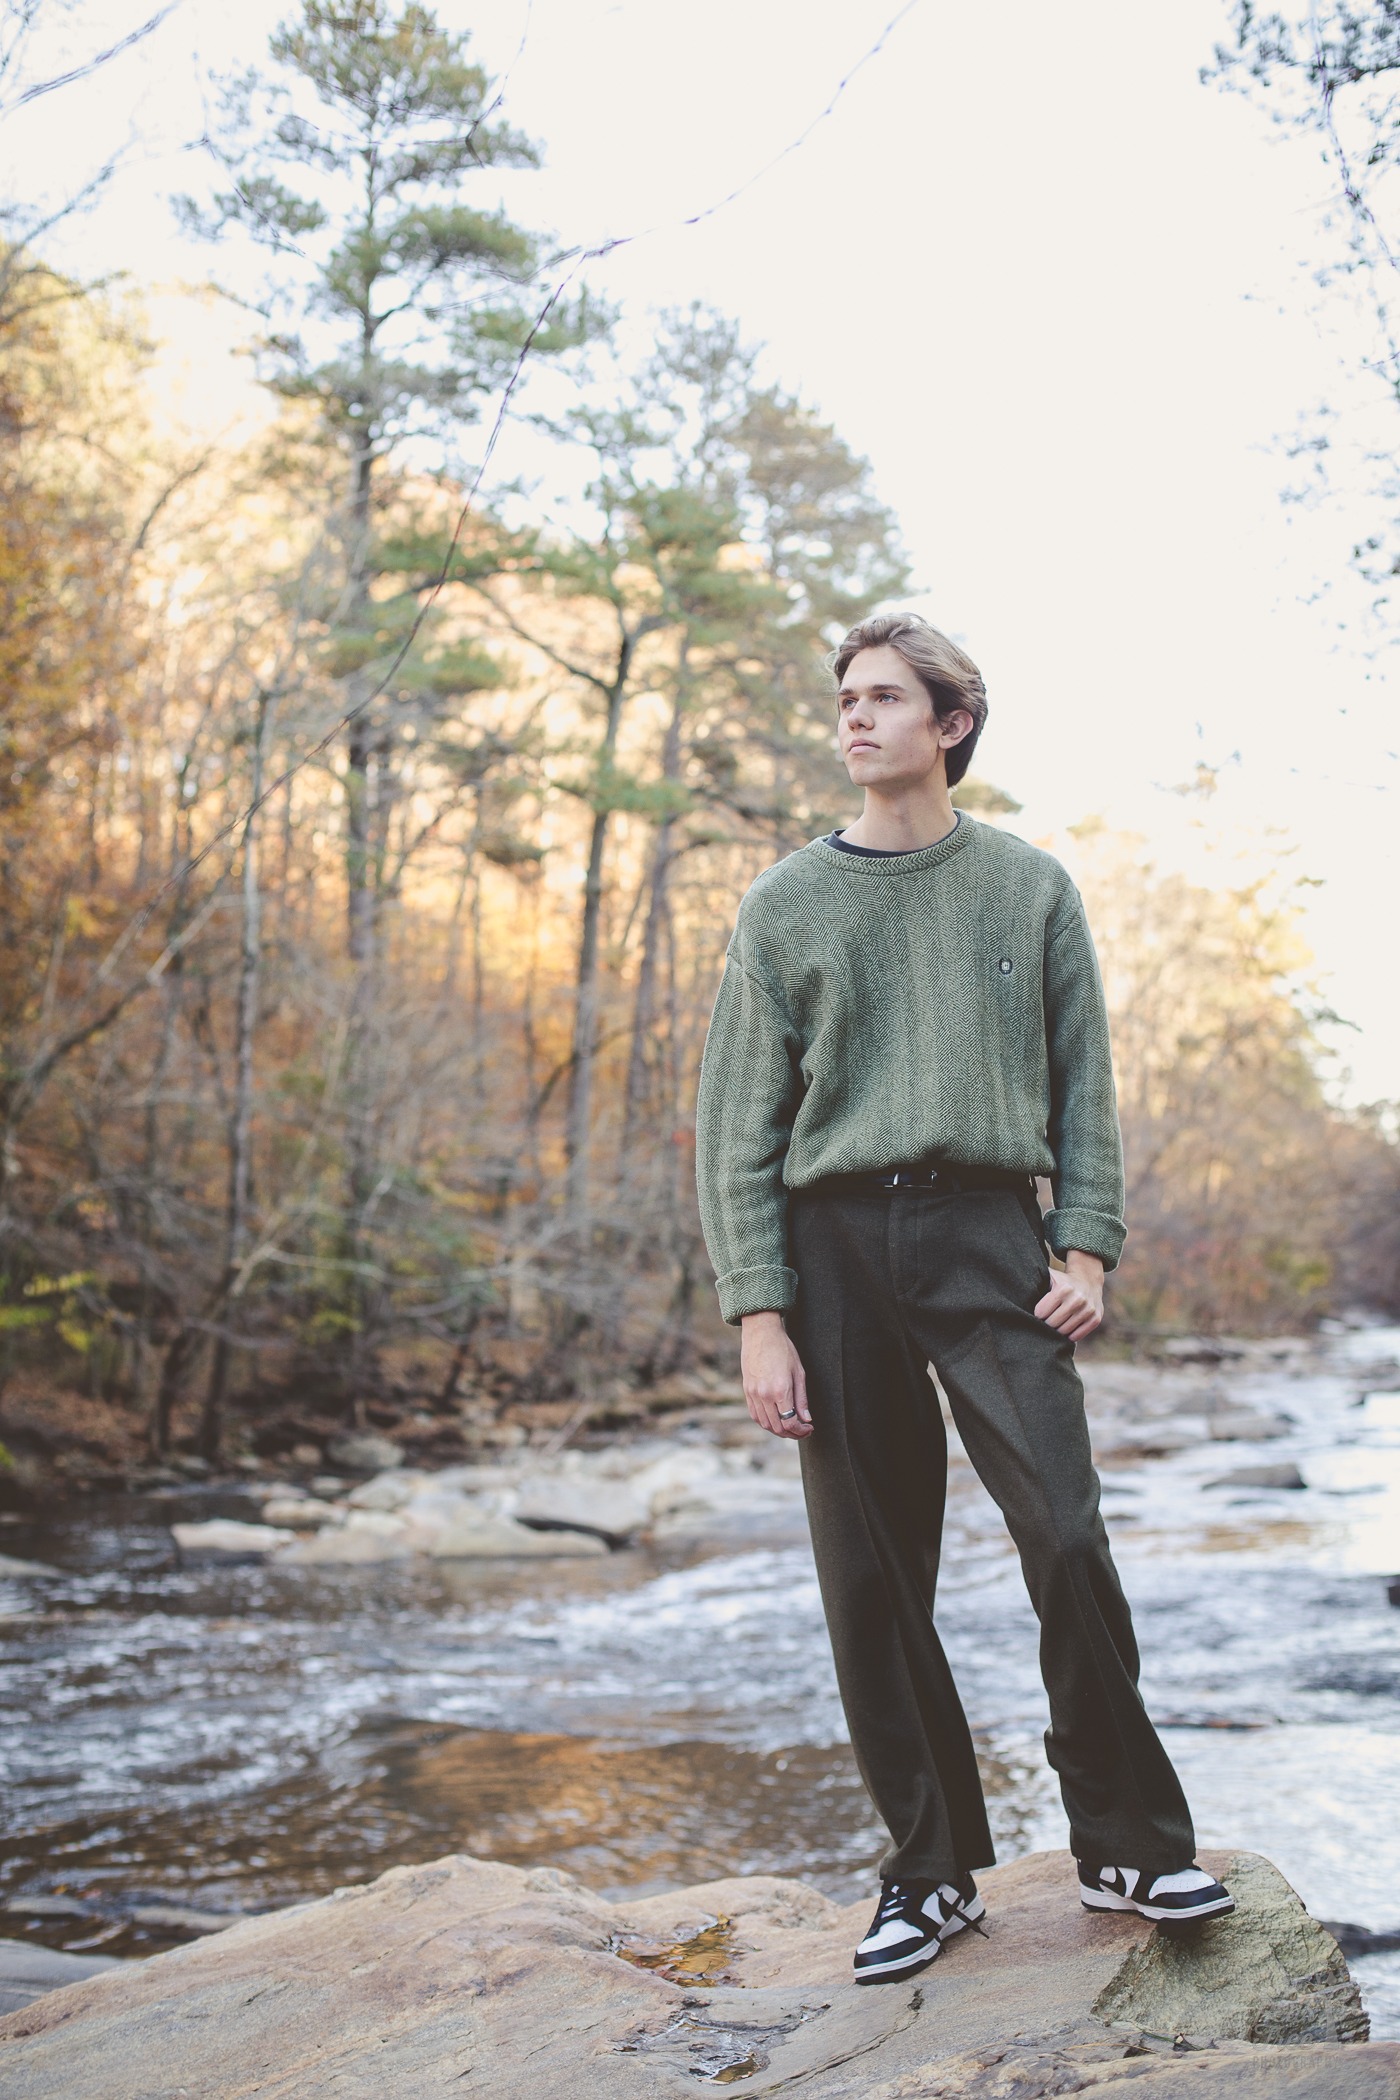 High school senior boy wearing a green sweater and looking at woods in Sope Creek